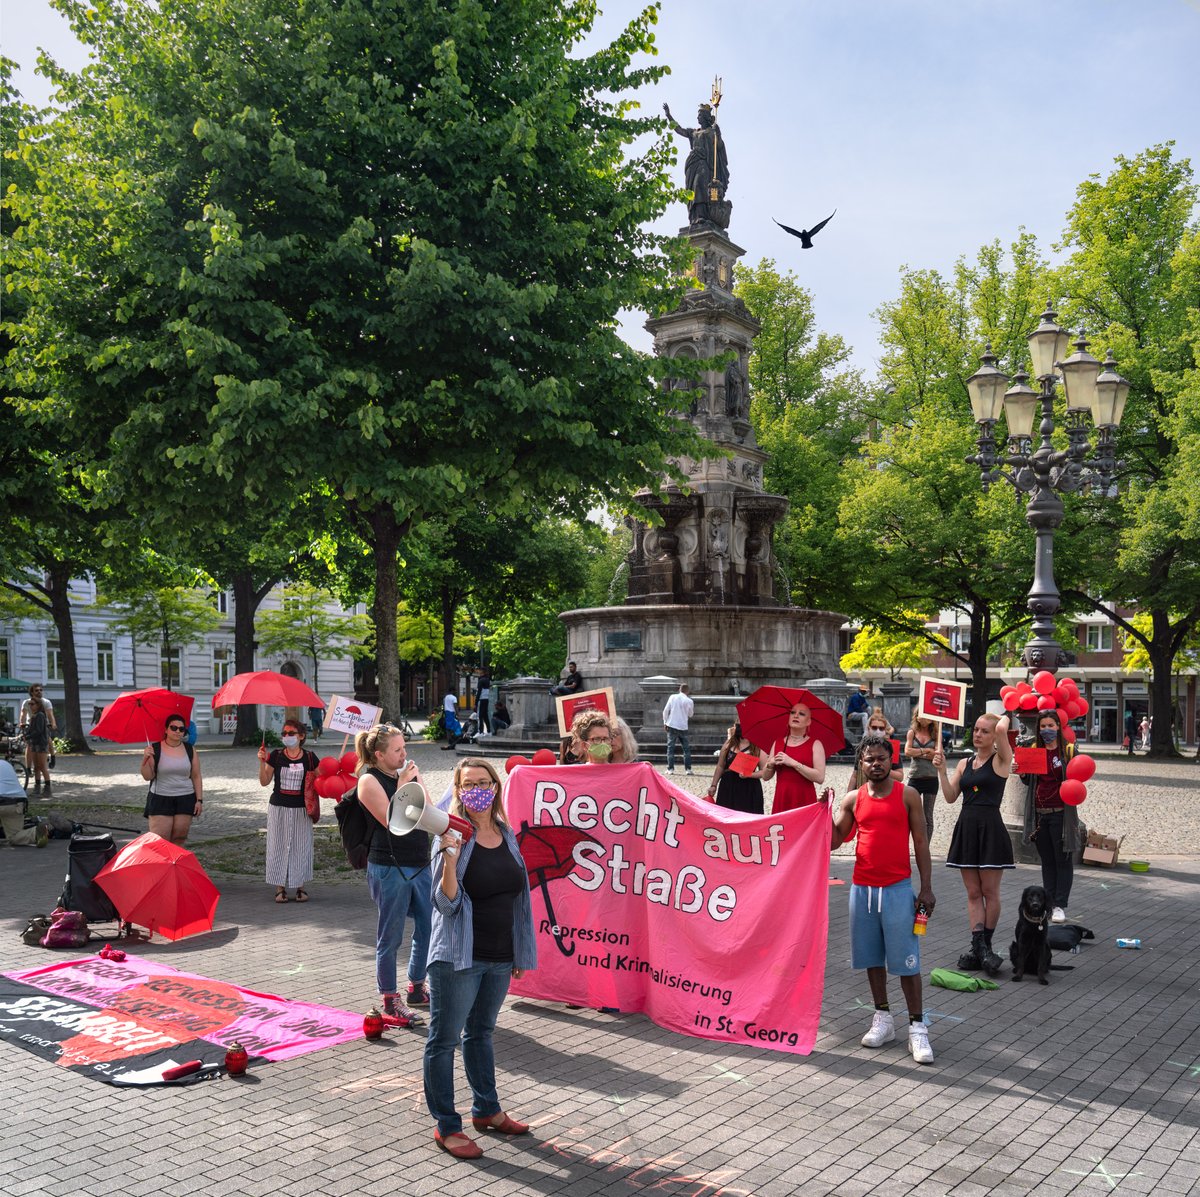 #IWD2020 #InternationalerHurentag #InternationalWhoresDay 
Pictures of yesterday in Hamburg:
Right to the street!